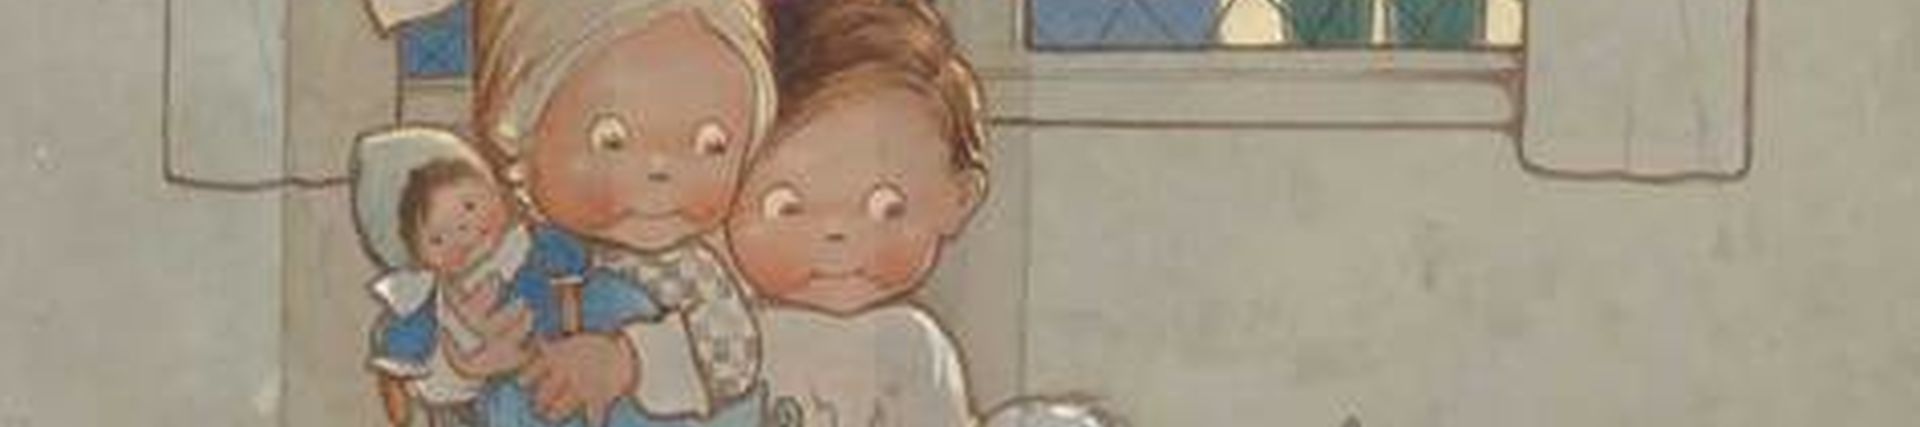 detail of a poster showing a girl and boy surrounded by toys